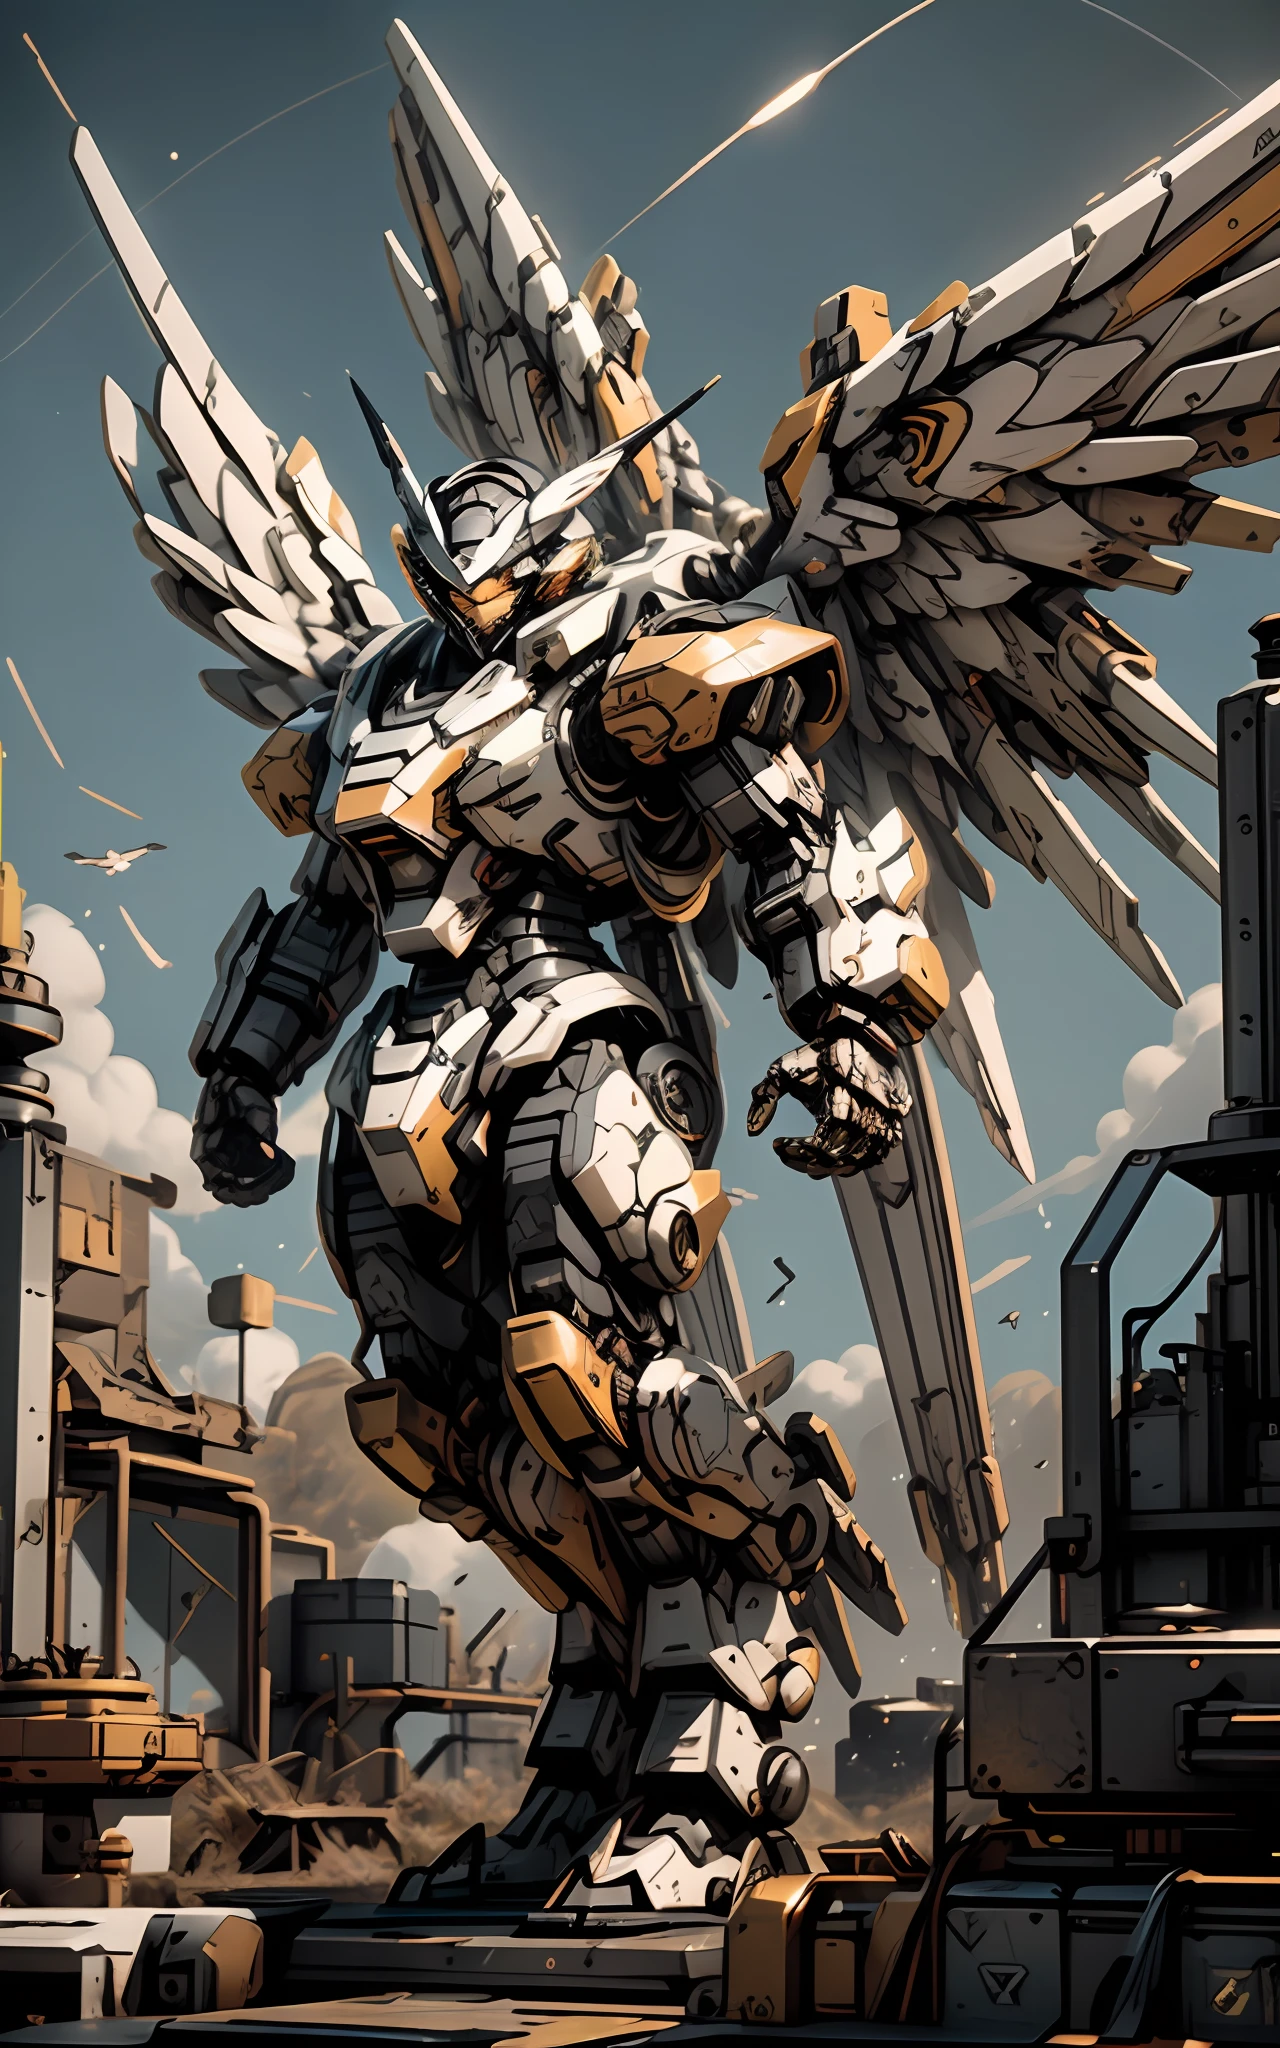 Arafede robot with wings and large metal body, alexandre ferra white mecha, Mecha wings, Alexander Ferra Mecha, mecha art, mechanized valkyrie, Mecha Inspiration, cool mecha style, greek god in mecha style, futuristic robot angel, Mechanized Valkyrie girl, detailed cosmic angelic robot, Mecha warrior,((Best Quality)), ((Masterpiece)), (Very Detailed:1.3), 3D,  HDR (High Dynamic Range), ray tracing, NVIDIA RTX, super resolution, unreal 5, subsurface scattering, PBR texture, post-processing, anisotropic filtering, depth of field, maximum sharpness and sharpness, multi-layer texture, albedo and highlight maps, surface shading, Accurate simulation of light-material interactions, perfect proportions, octane rendering, duotone lighting, low ISO, white balance, rule of thirds, wide aperture, 8K RAW, efficient sub-pixels, subpixel convolution, luminescent particles, light scattering, Tyndall effect